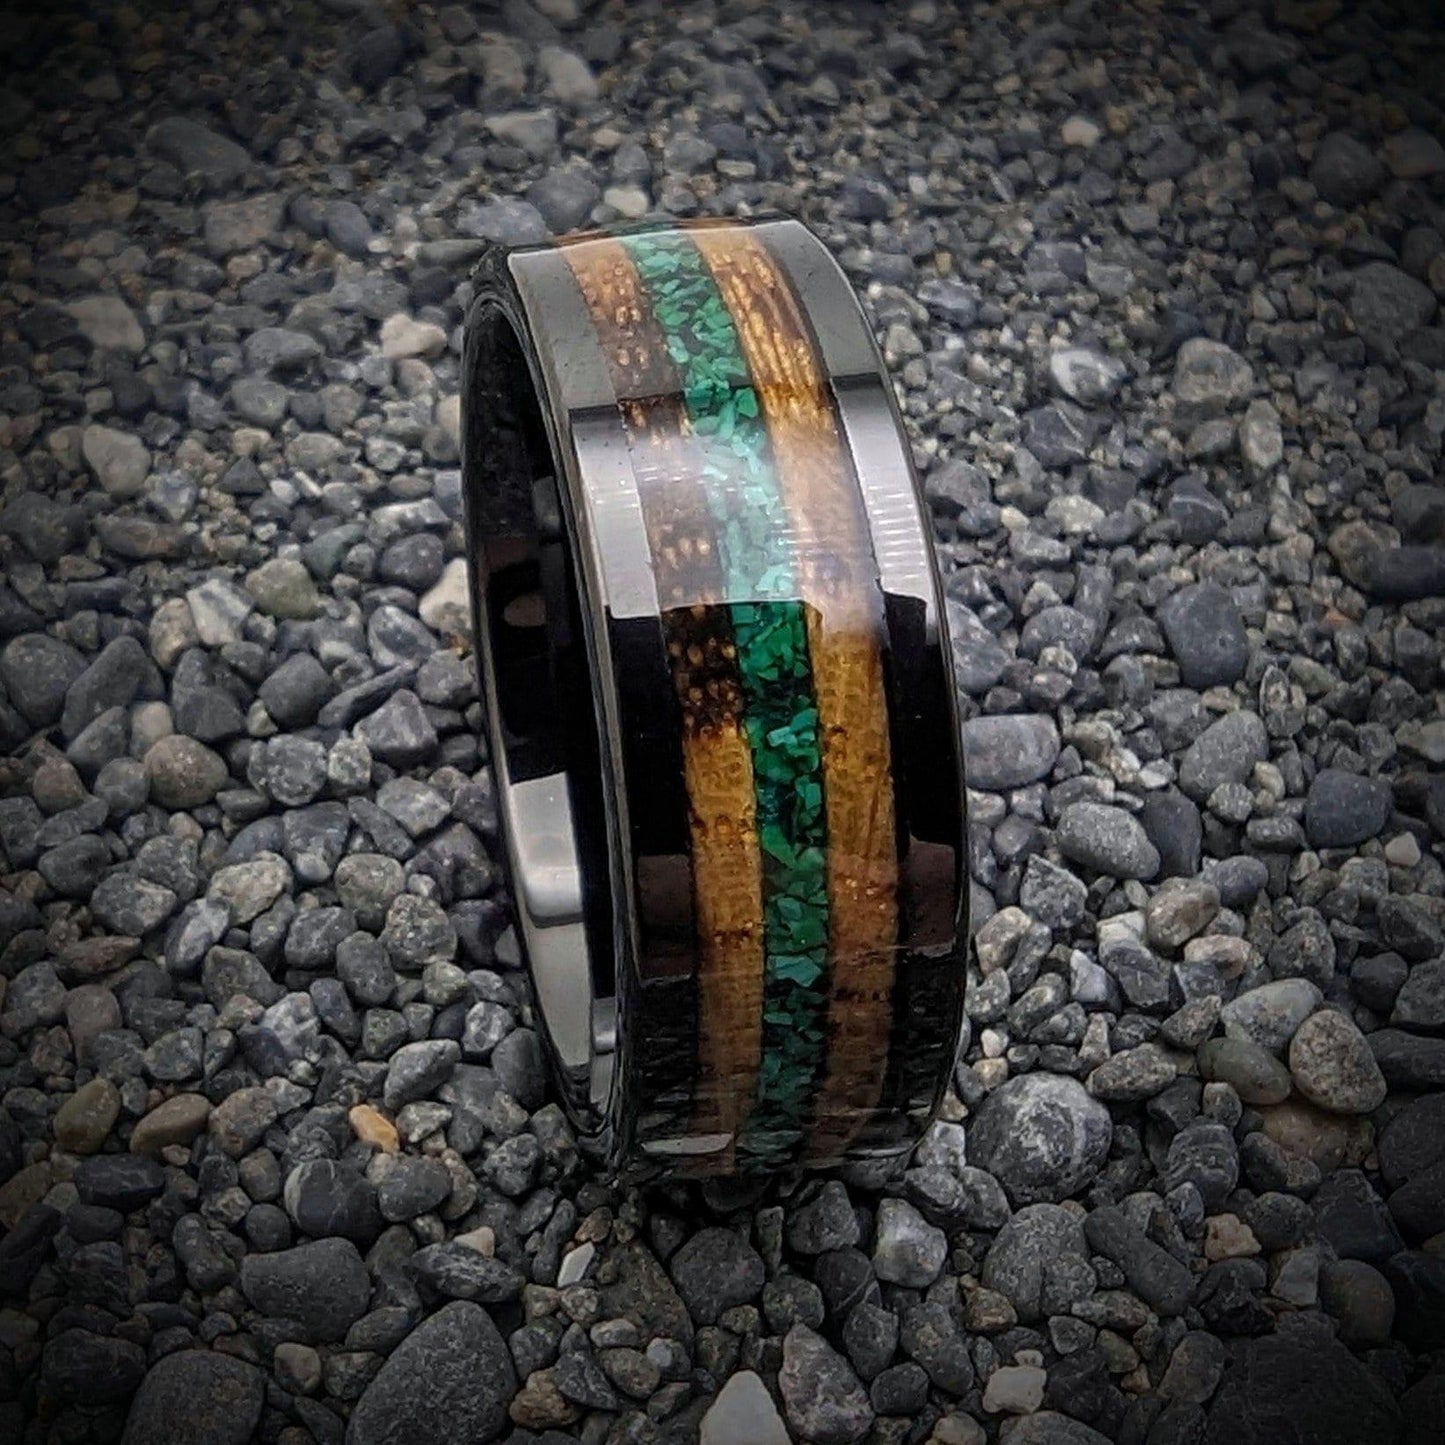 Malachite Ring with Burnt Whiskey Barrel in a Tungsten Core, Whiskey Barrel Wedding Band, Mens Wedding Band